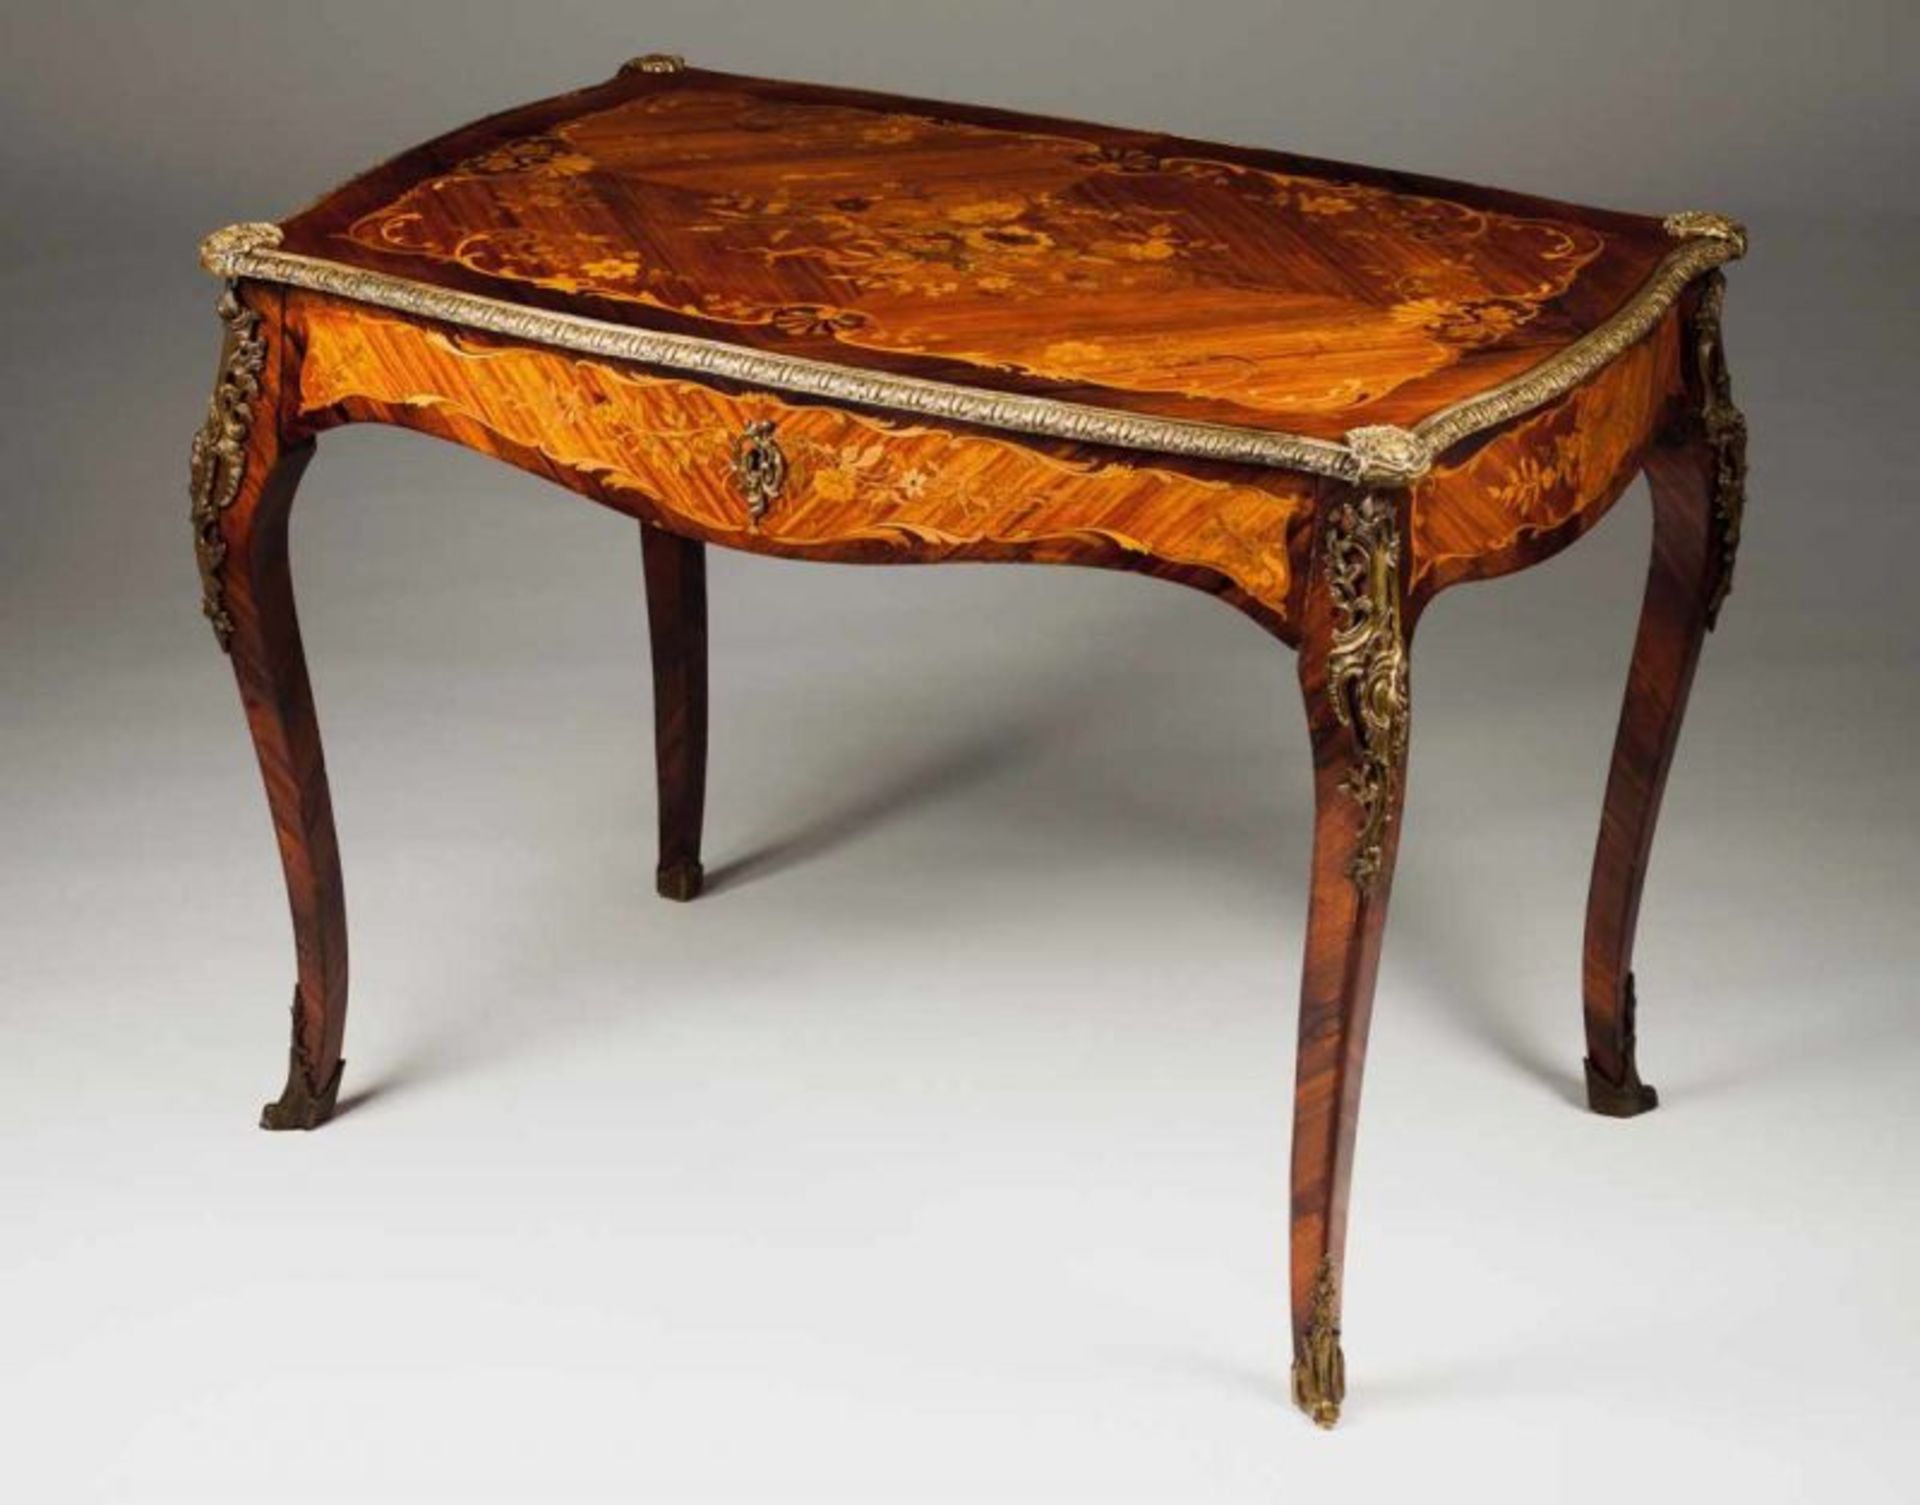 A bureau plat Rosewood with marquetery decoration depicting shell and floral motifs and scrolls